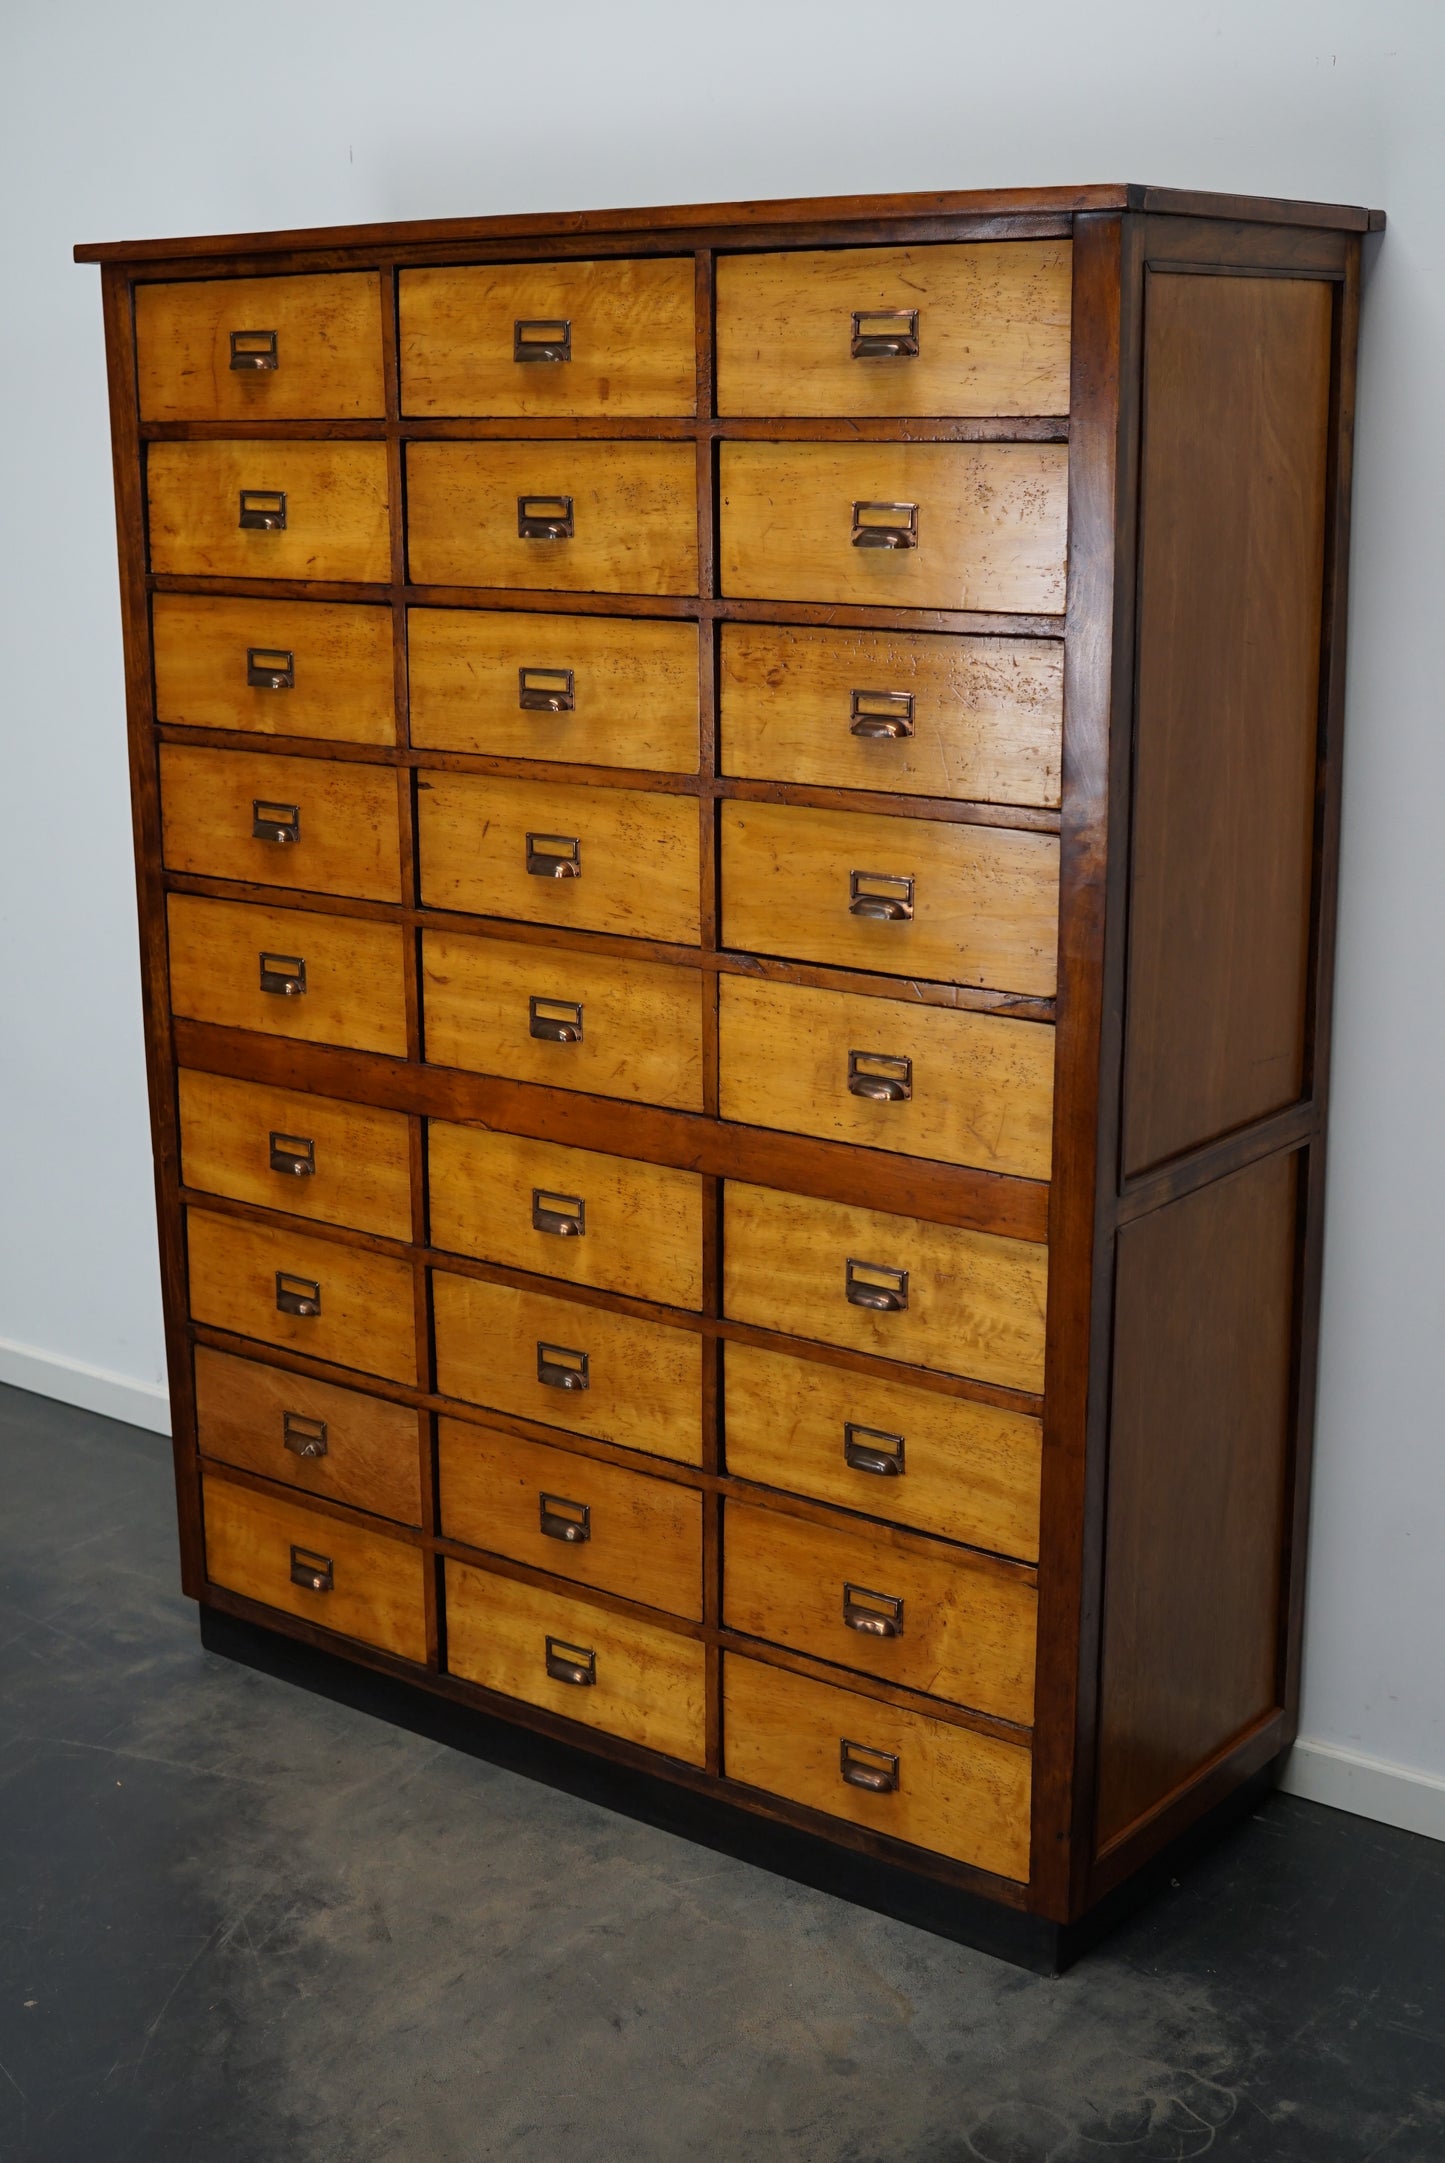 Vintage Large Dutch Pine School Cabinet / Bank of Drawers, Mid-20th Century